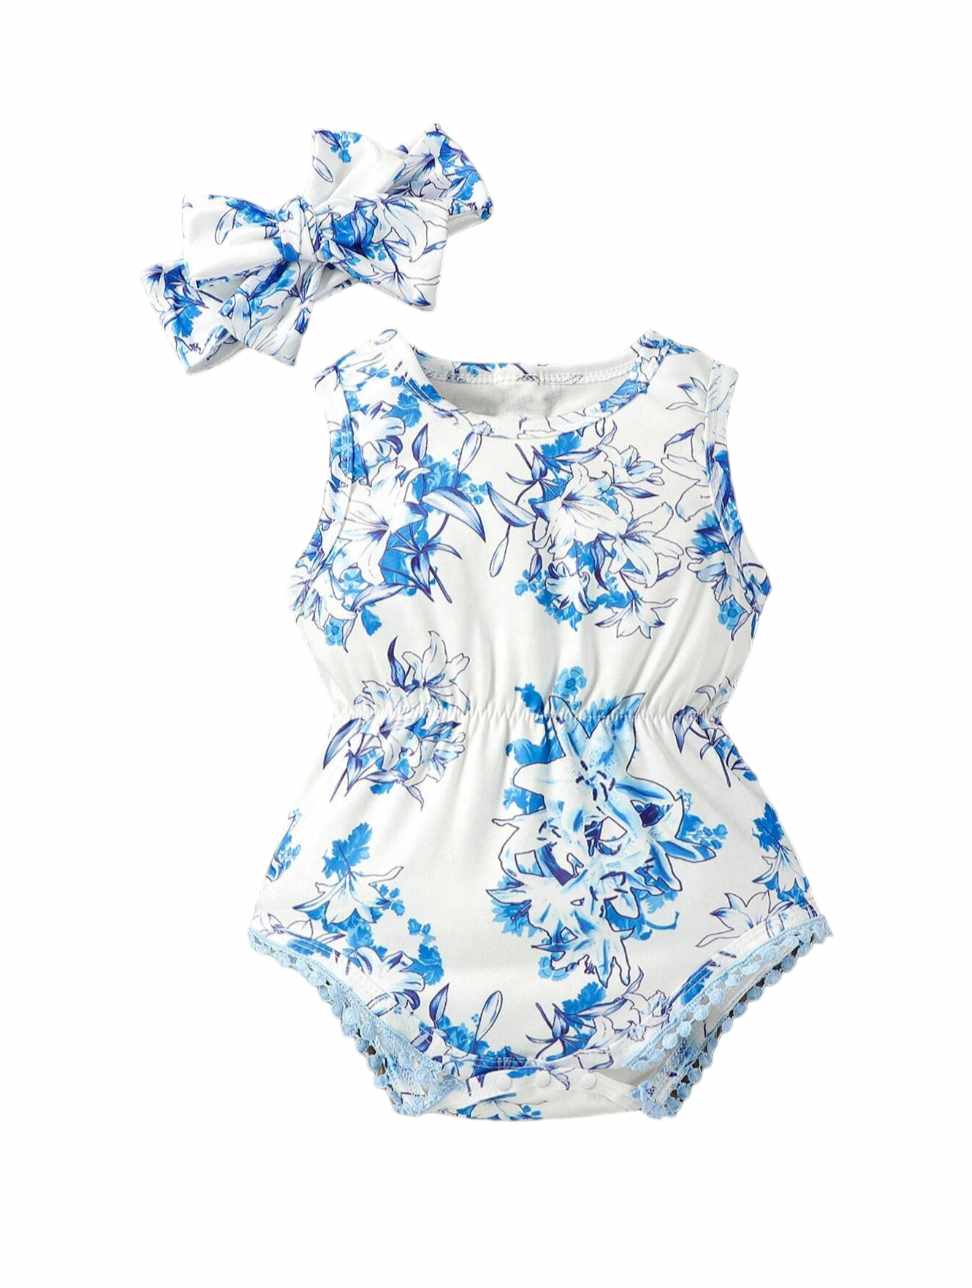 FLORA | A Touch of Vintage Charm for Your Little Darling